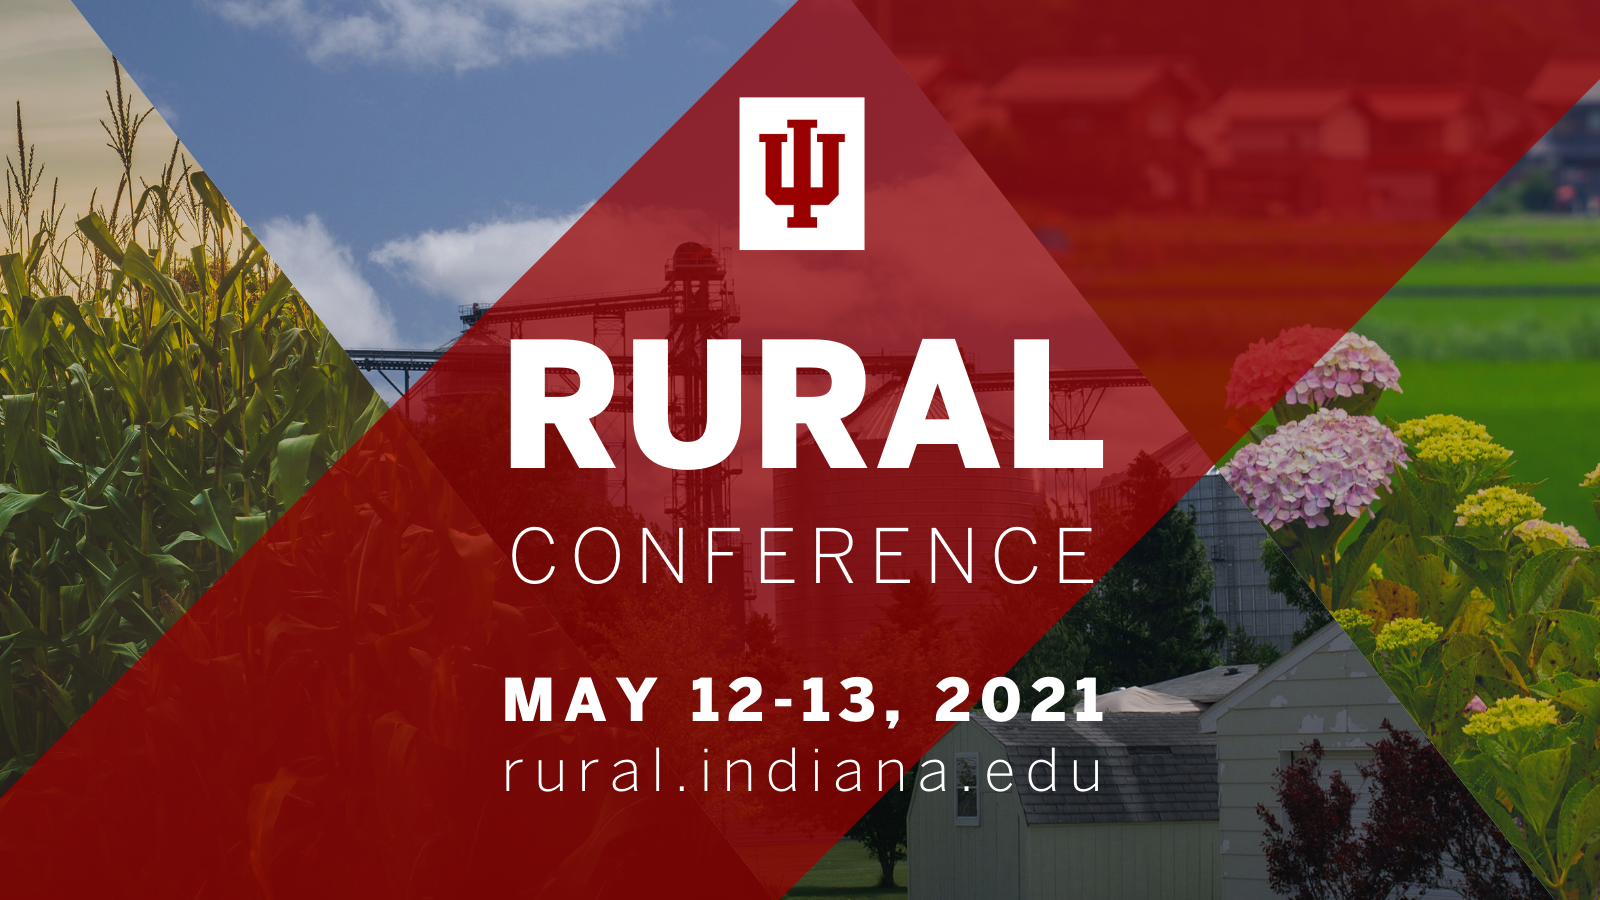 Indiana University Rural Conference Events Center for Rural